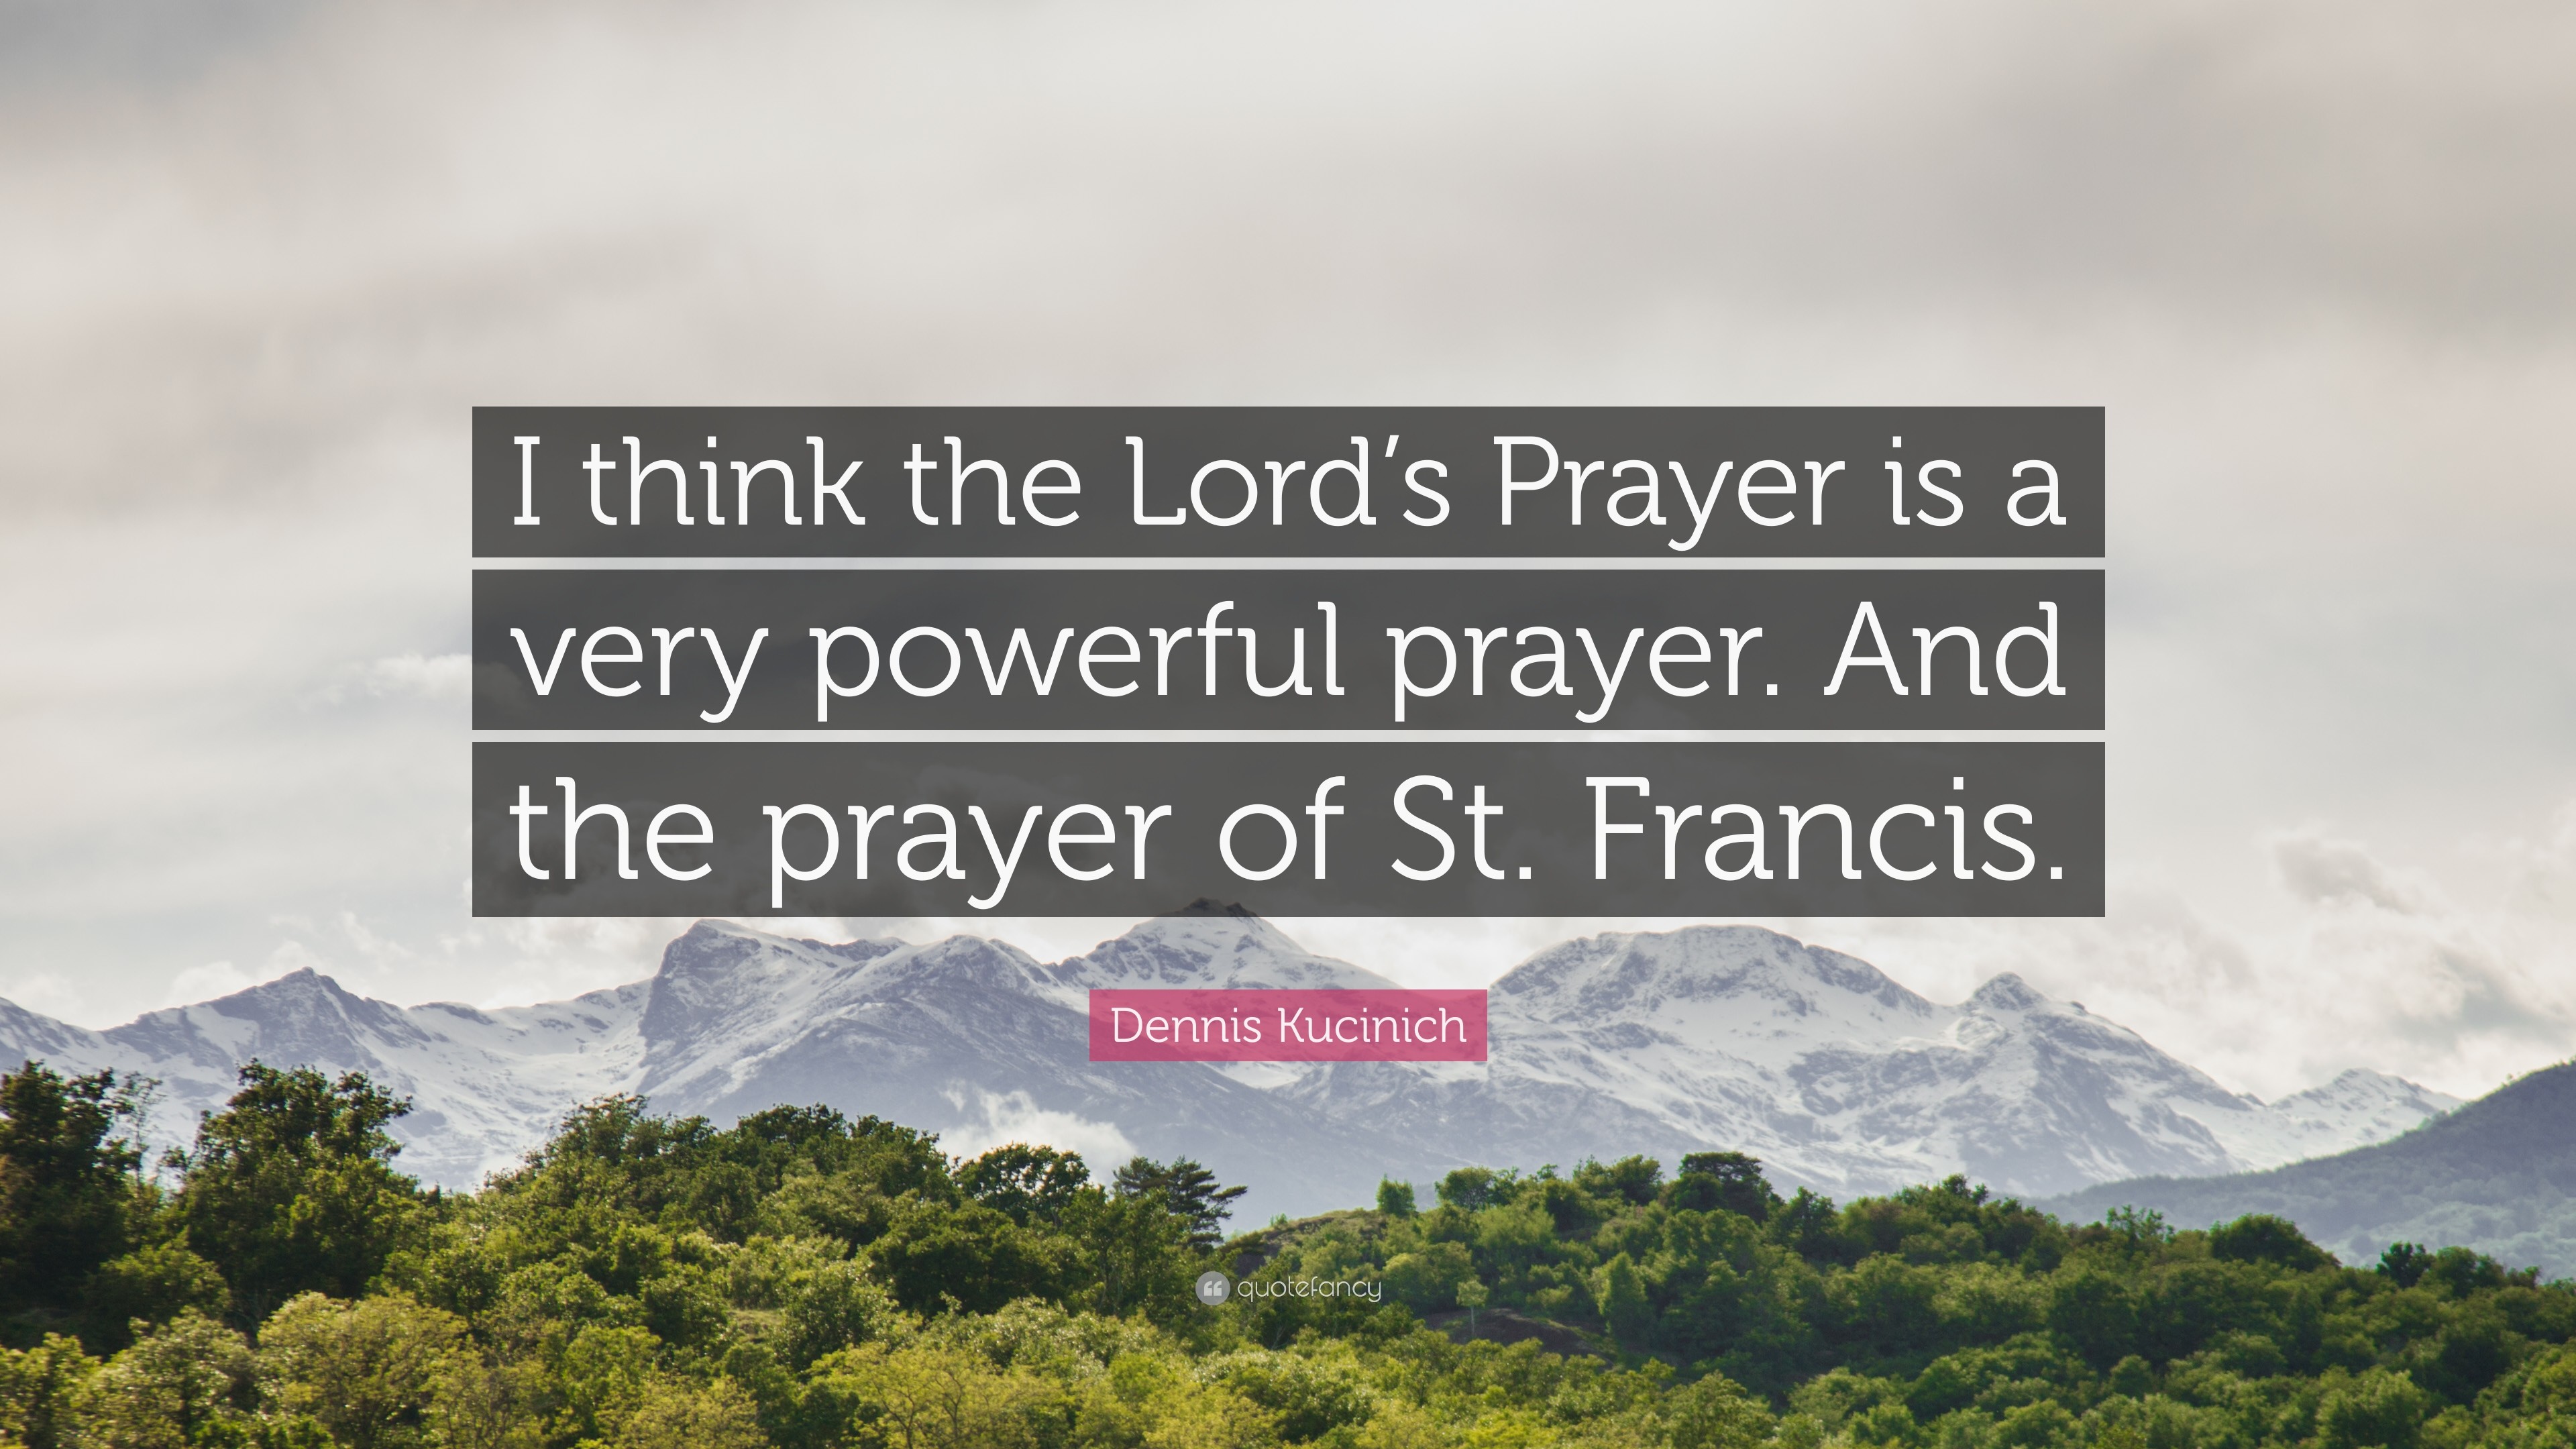 3840x2160 Dennis Kucinich Quote: “I think the Lord's Prayer is a very powerful prayer.